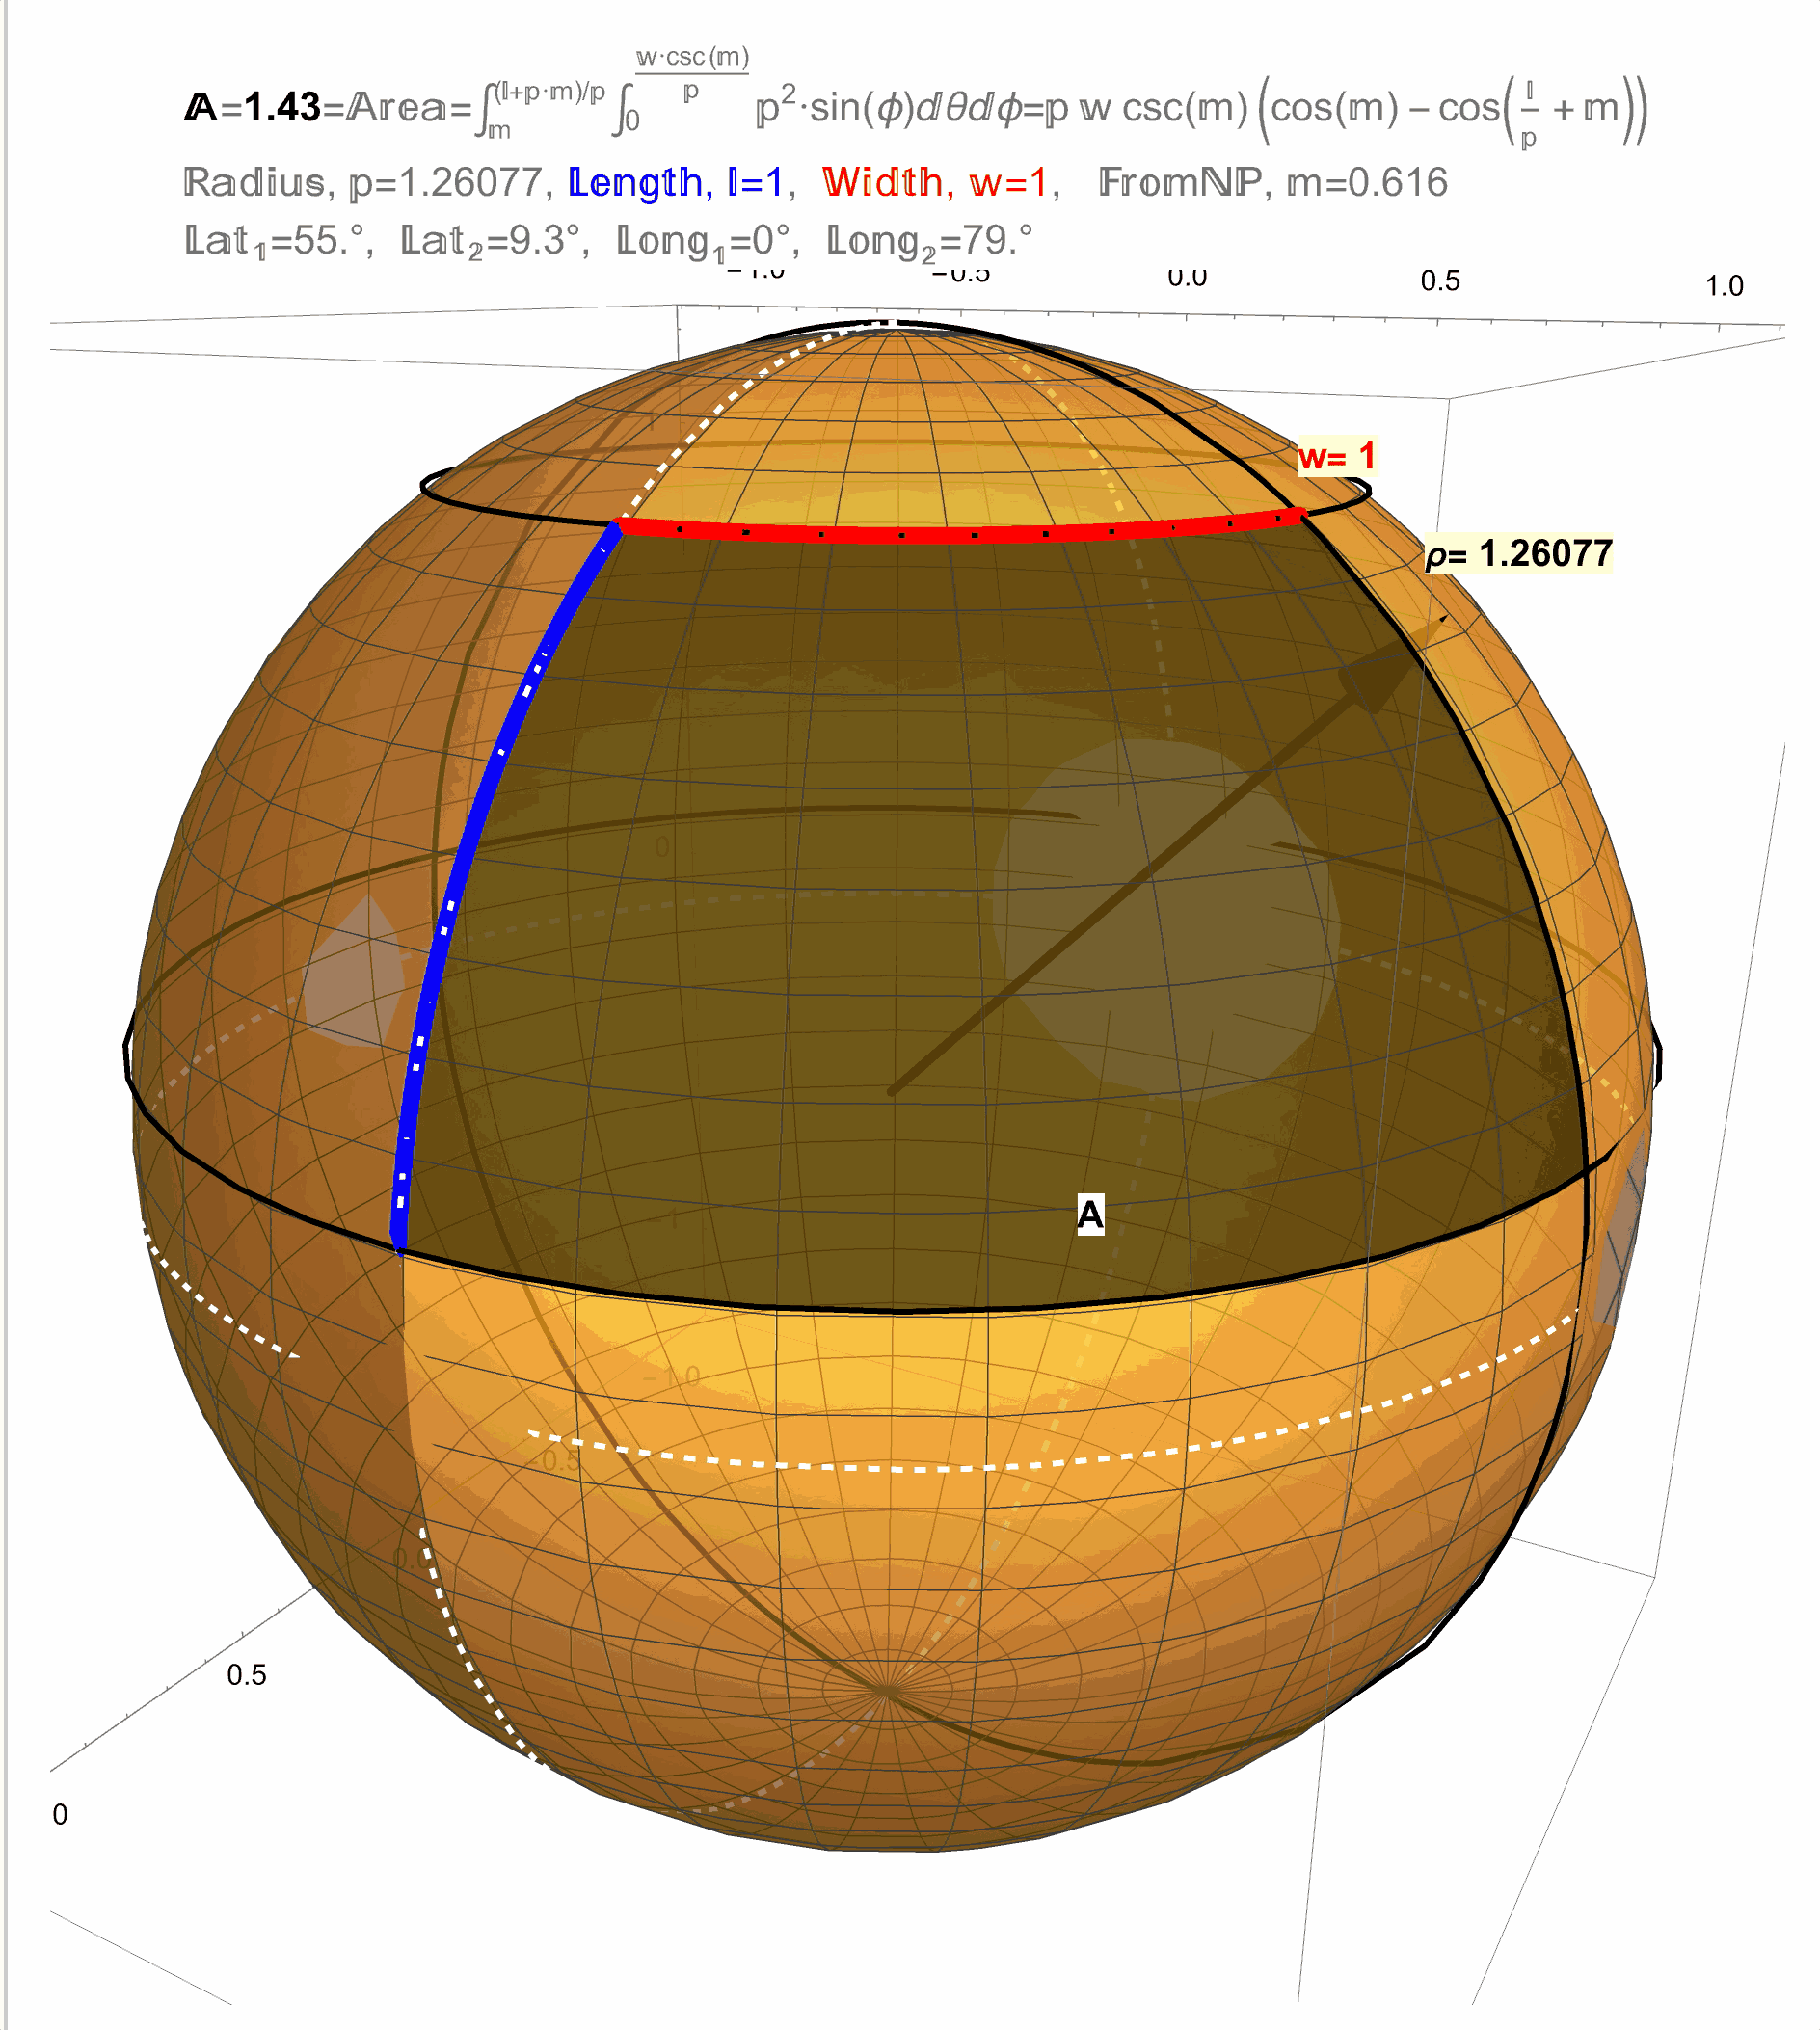 Result: The area of a \(1 \times 1\) square on a sphere approaches \(A=1\) as the radius of the sphere \(\rho\) increases.